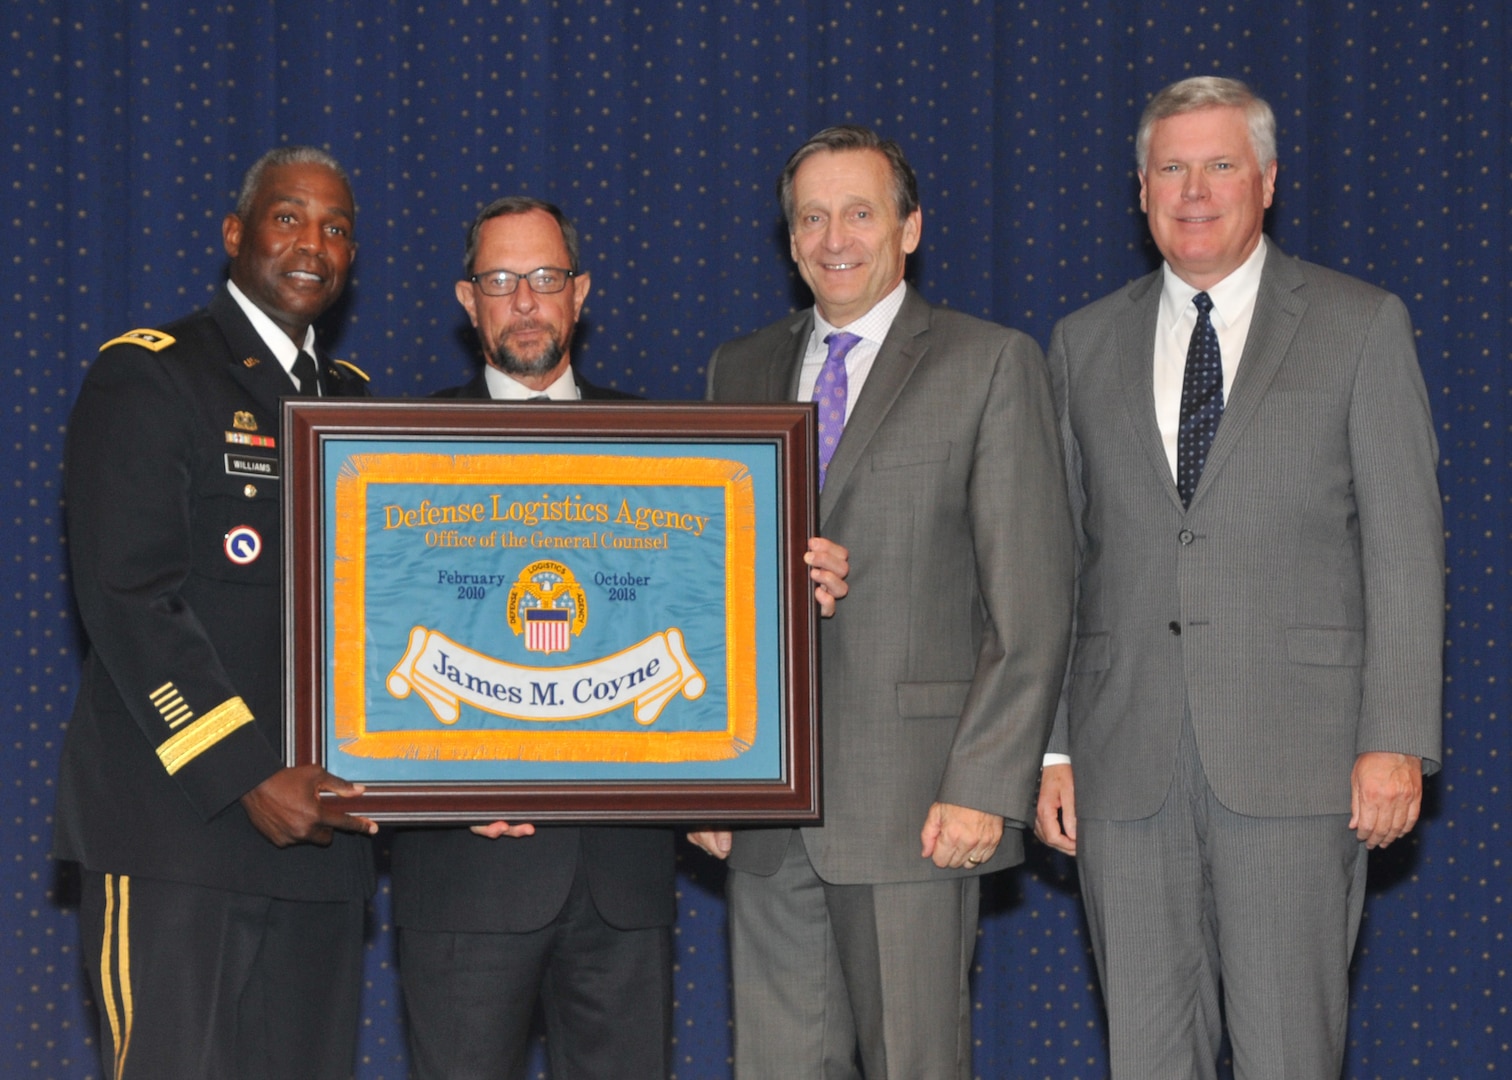 DLA Director Army Lt. Gen. Darrell Williams (far left) and former DLA directors Vice Adm. Mark Harnitchek (second from right) and Vice Adm. Alan Thompson (far right), present DLA General Counsel James Coyne an honorary DLA flag during his retirement ceremony Aug. 10 at the McNamara Headquarters Complex, Fort Belvoir, Virginia. Photo by Teodora Mocanu.